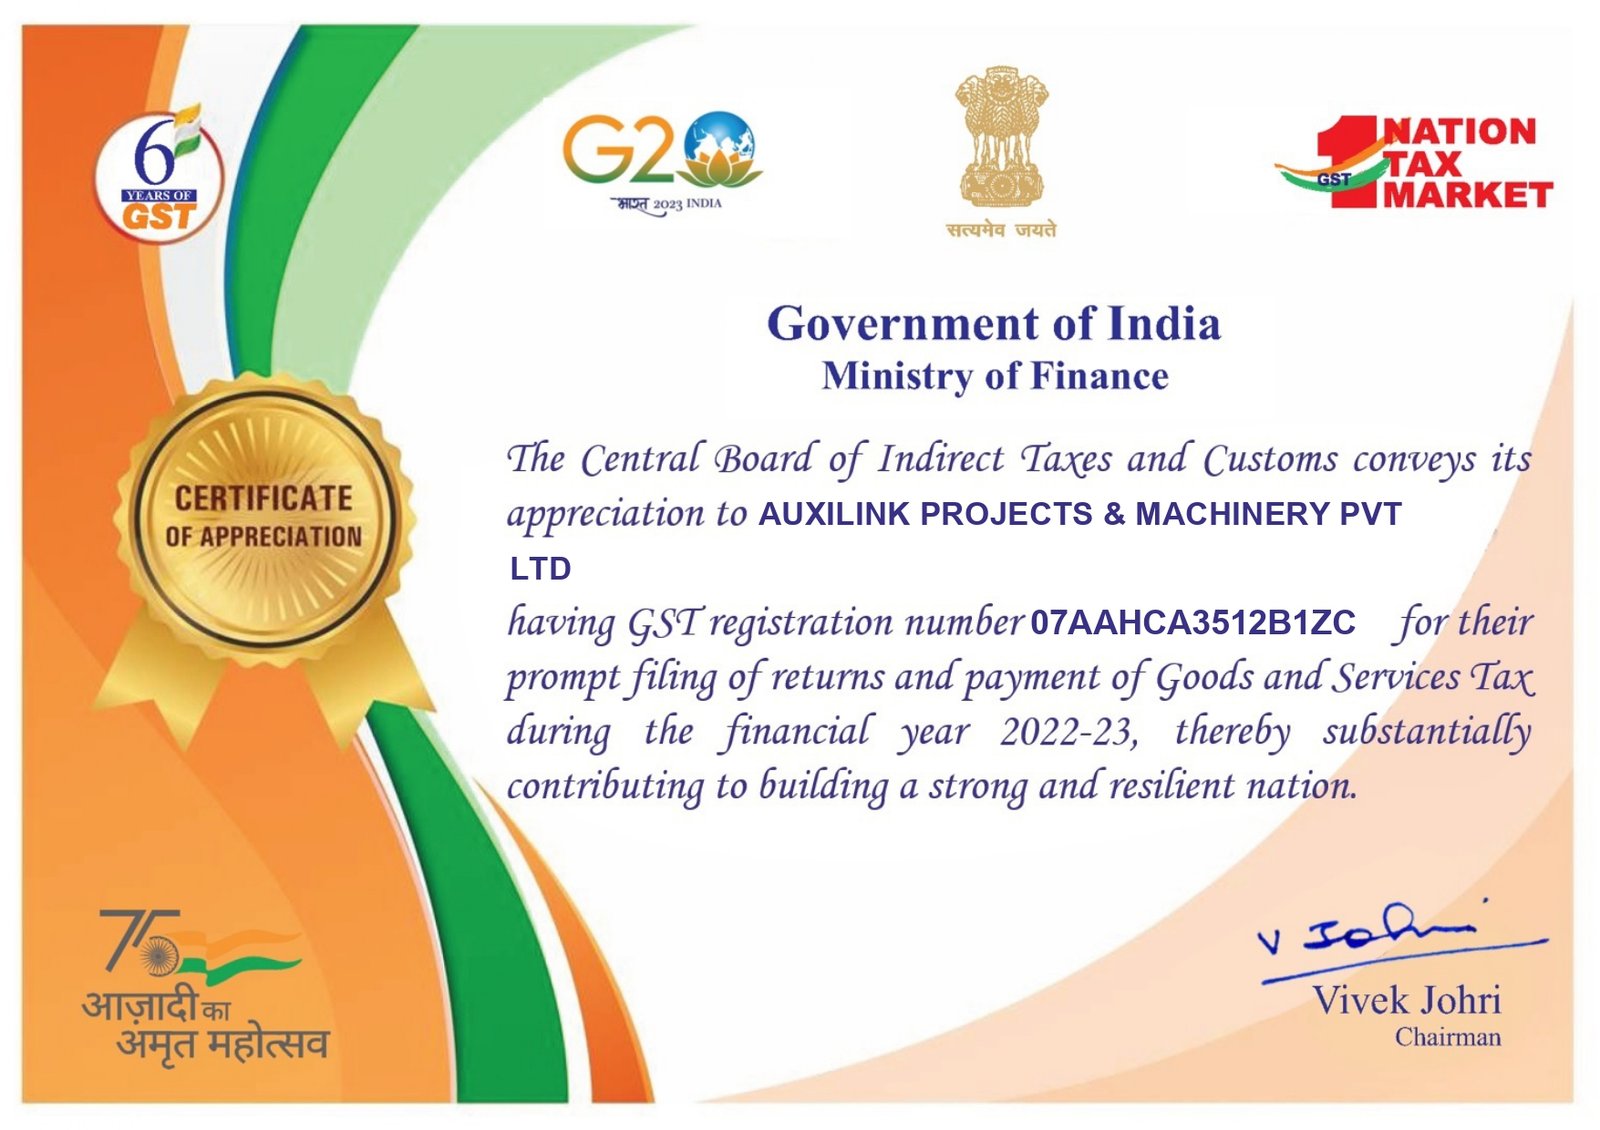 E-certificate-GST-G20-auxilink-projects.jpg